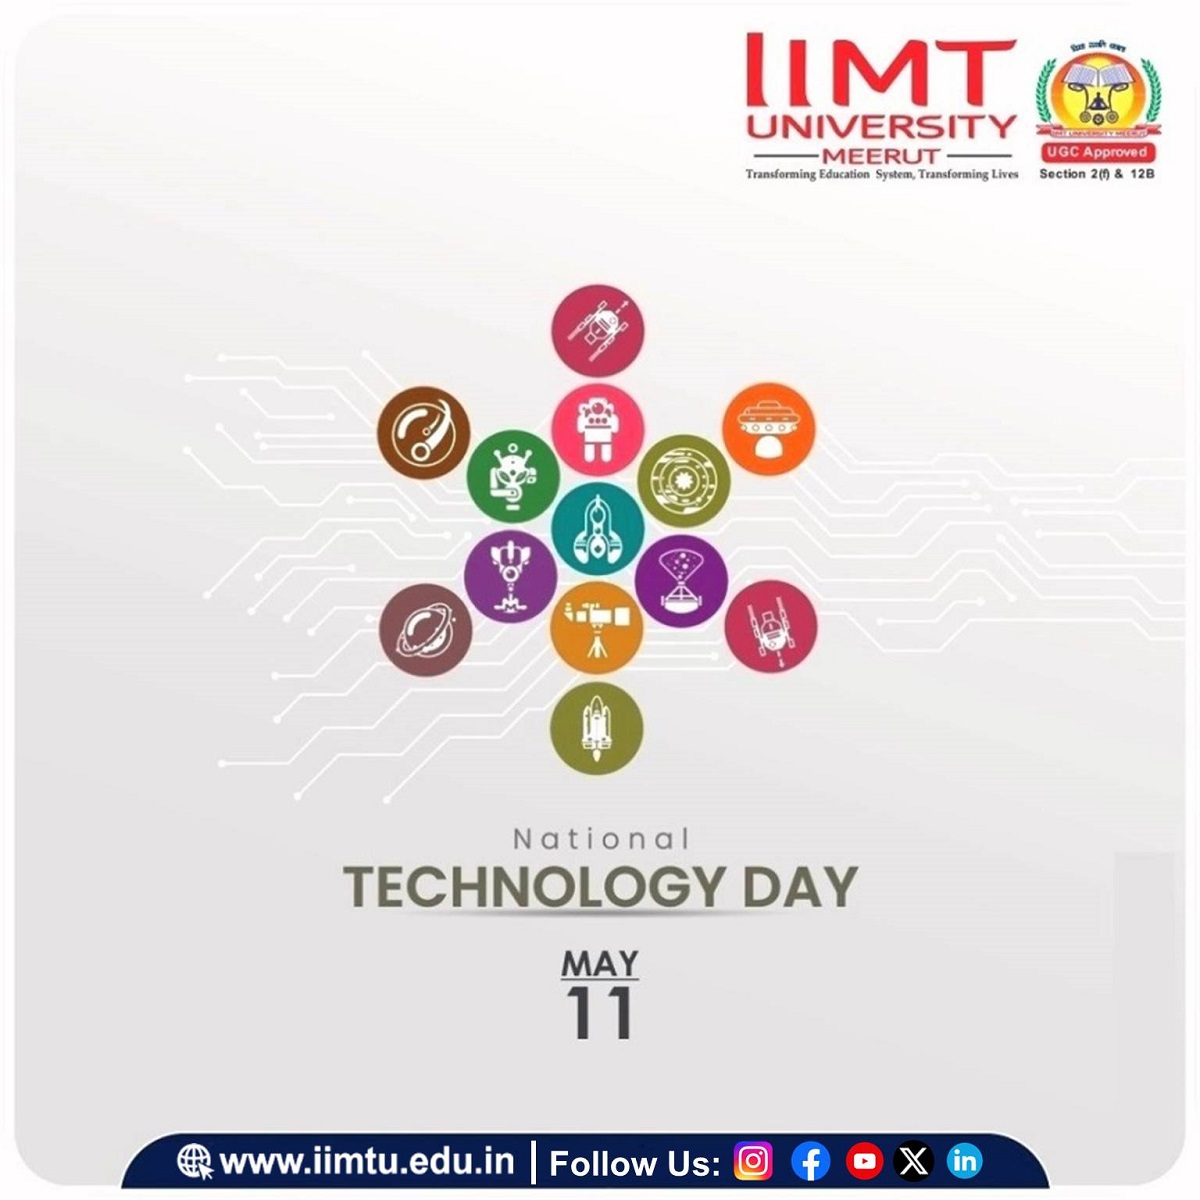 Happy National Technology Day to all the engineers, scientists and developers who work tirelessly to make our lives easier and more efficient.

#NationalTechnologyDay #techyes #thankyou

#IIMTU #TransformingEducationSystem #TransformingLives
#AdmissionsOpen2024 #CollegeAdmissions